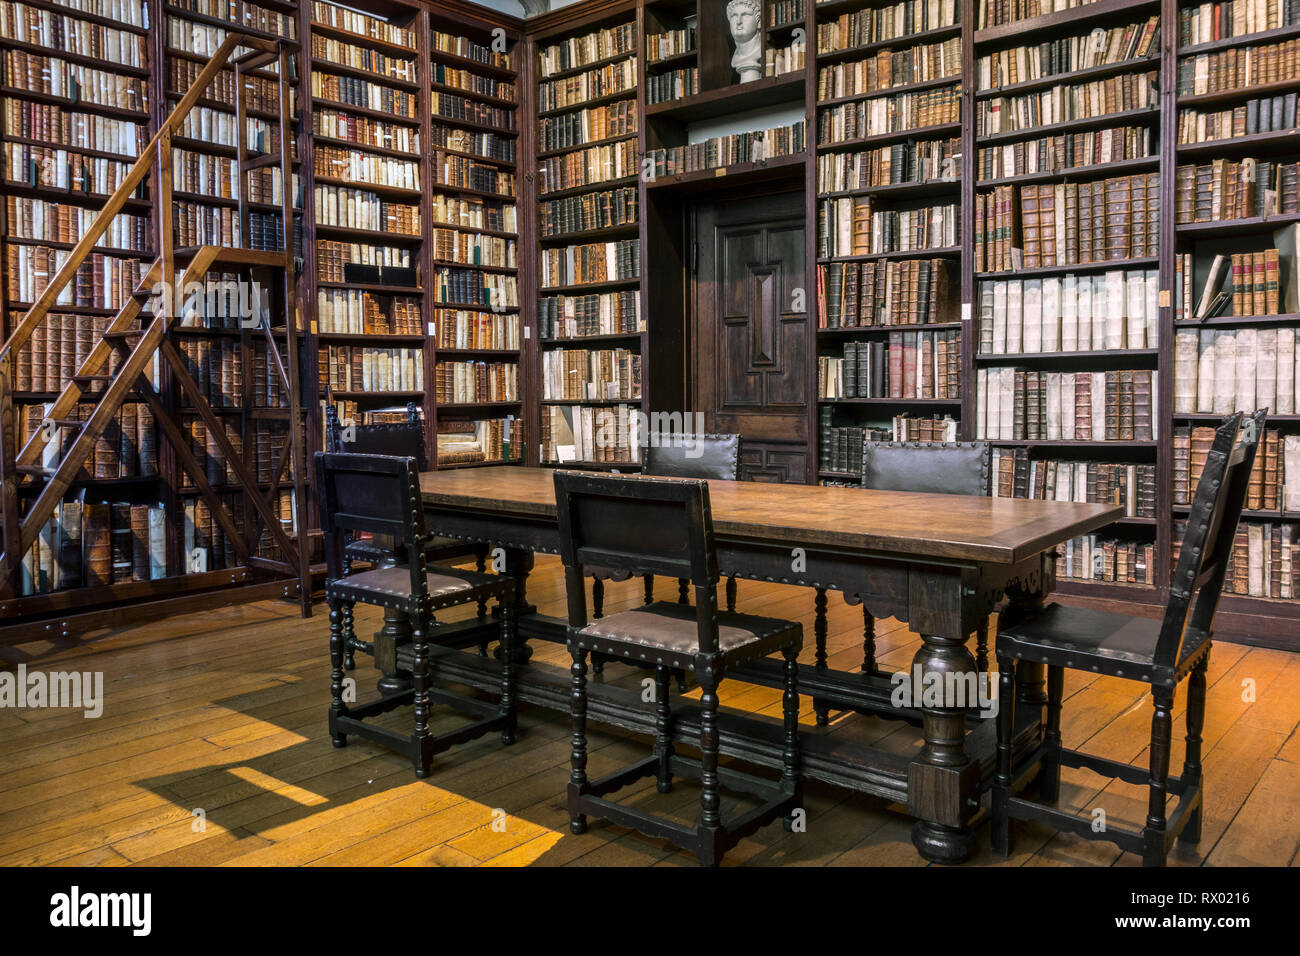 Bookshelves with old books in the Small Library at the Plantin-Moretus Museum / Plantin-Moretusmuseum about 16th century printers, Antwerp, Belgium Stock Photo